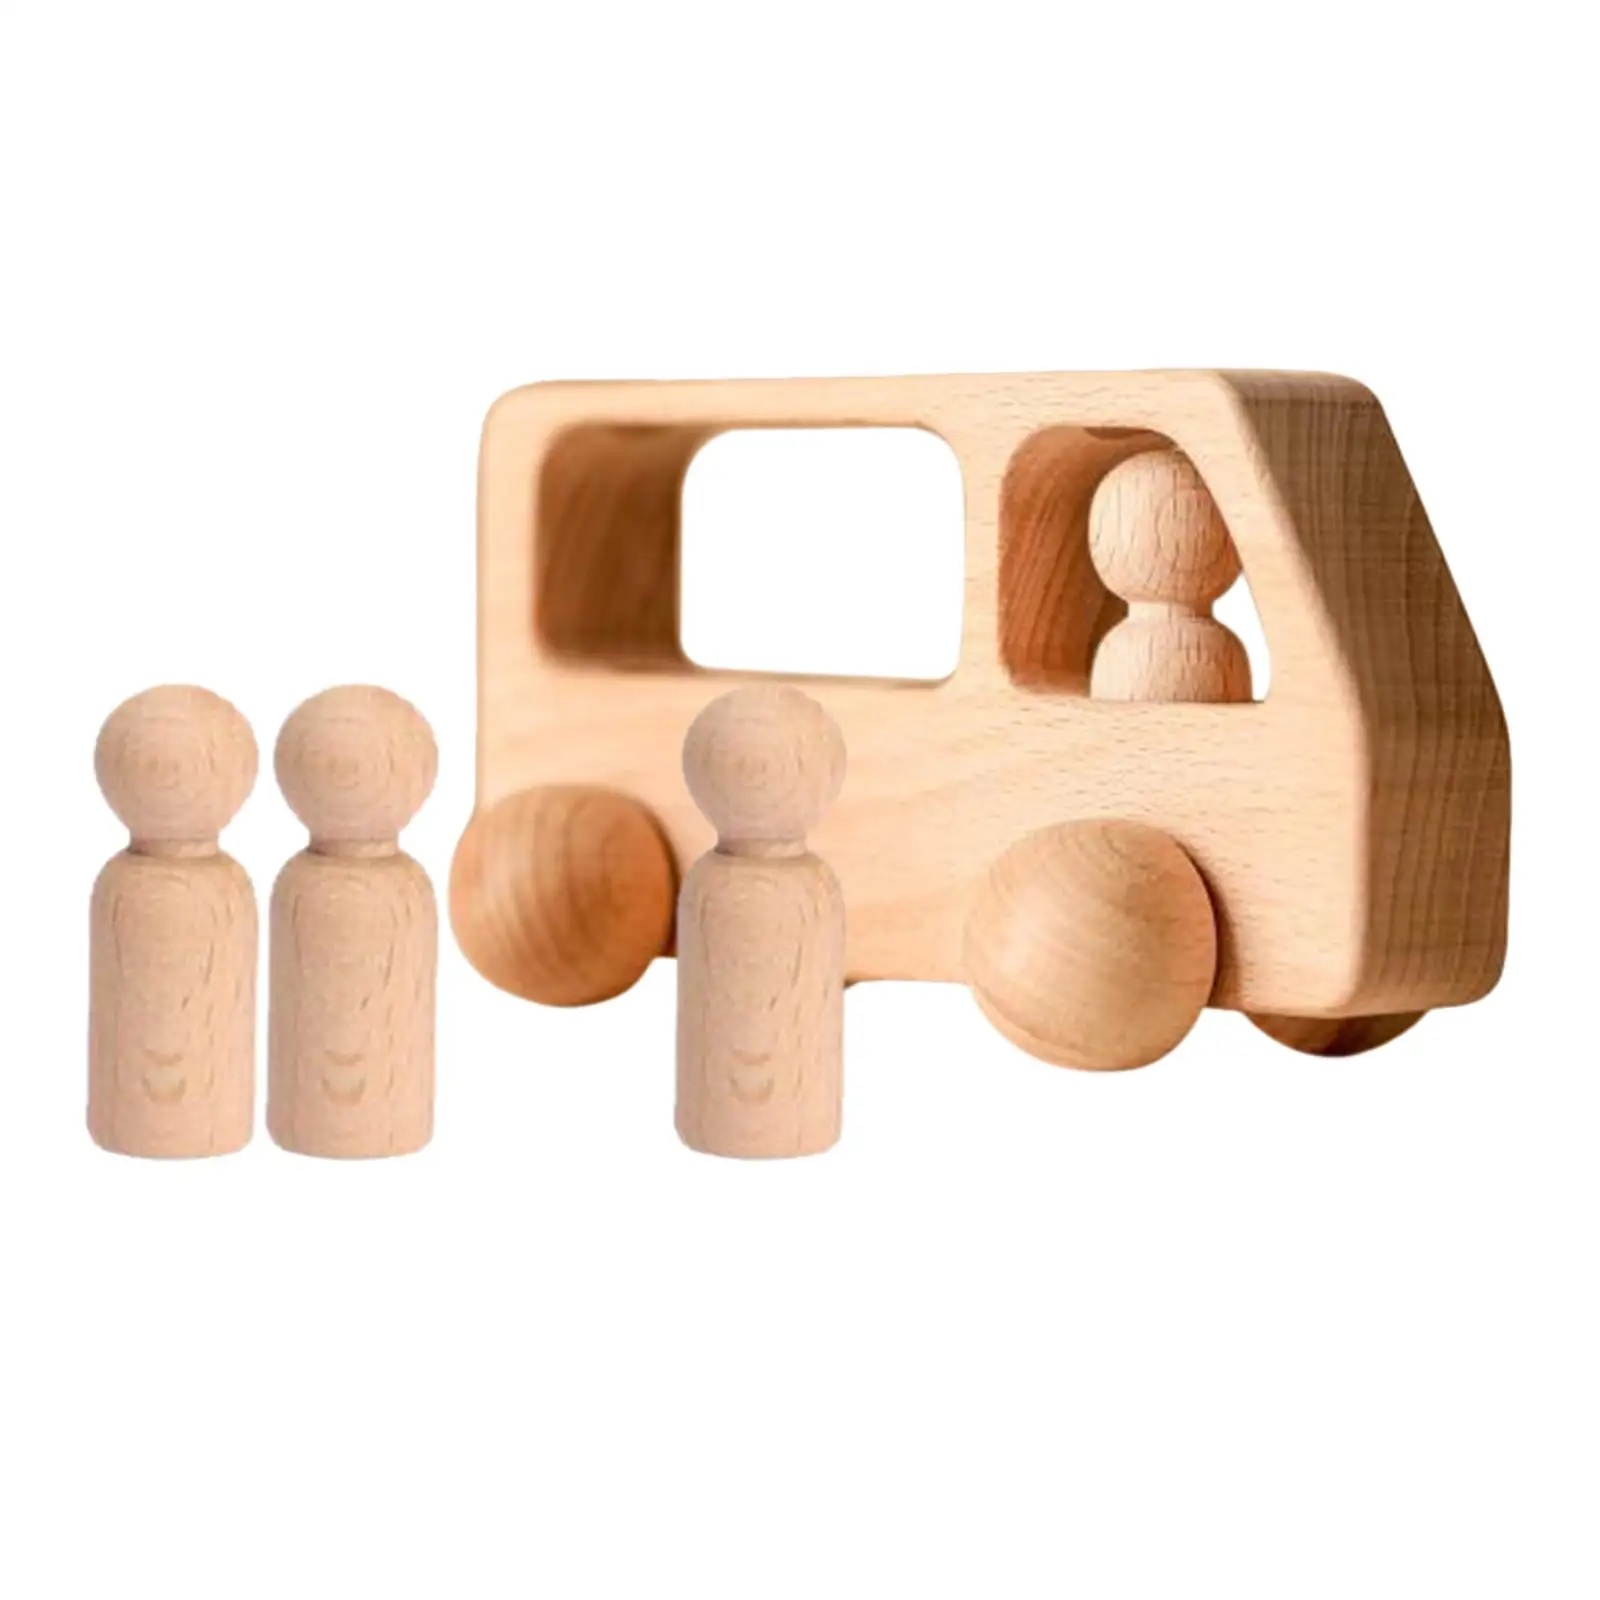 Wooden Bus Toy Car Blocks Preschool Learning Activities for Kids Gift